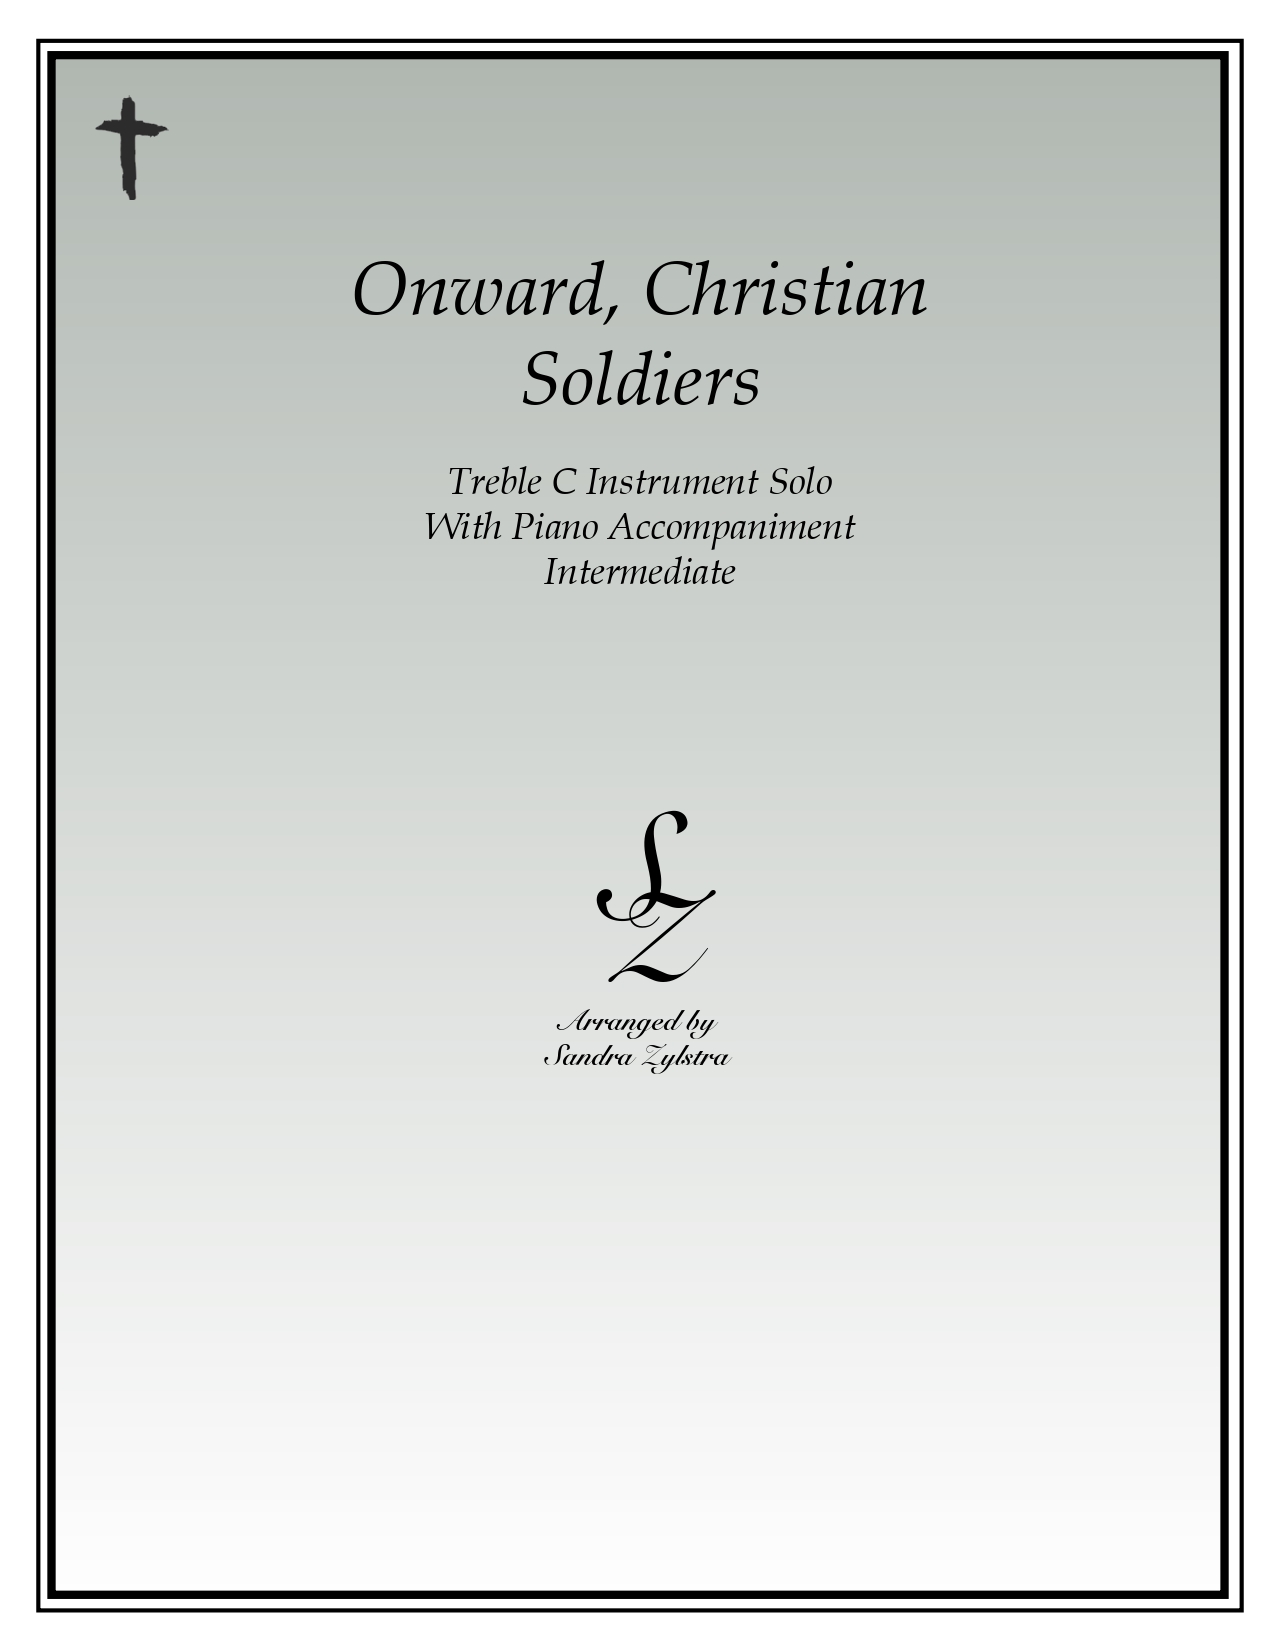 Onward Christian Soldiers treble C instrument solo part cover page 00011